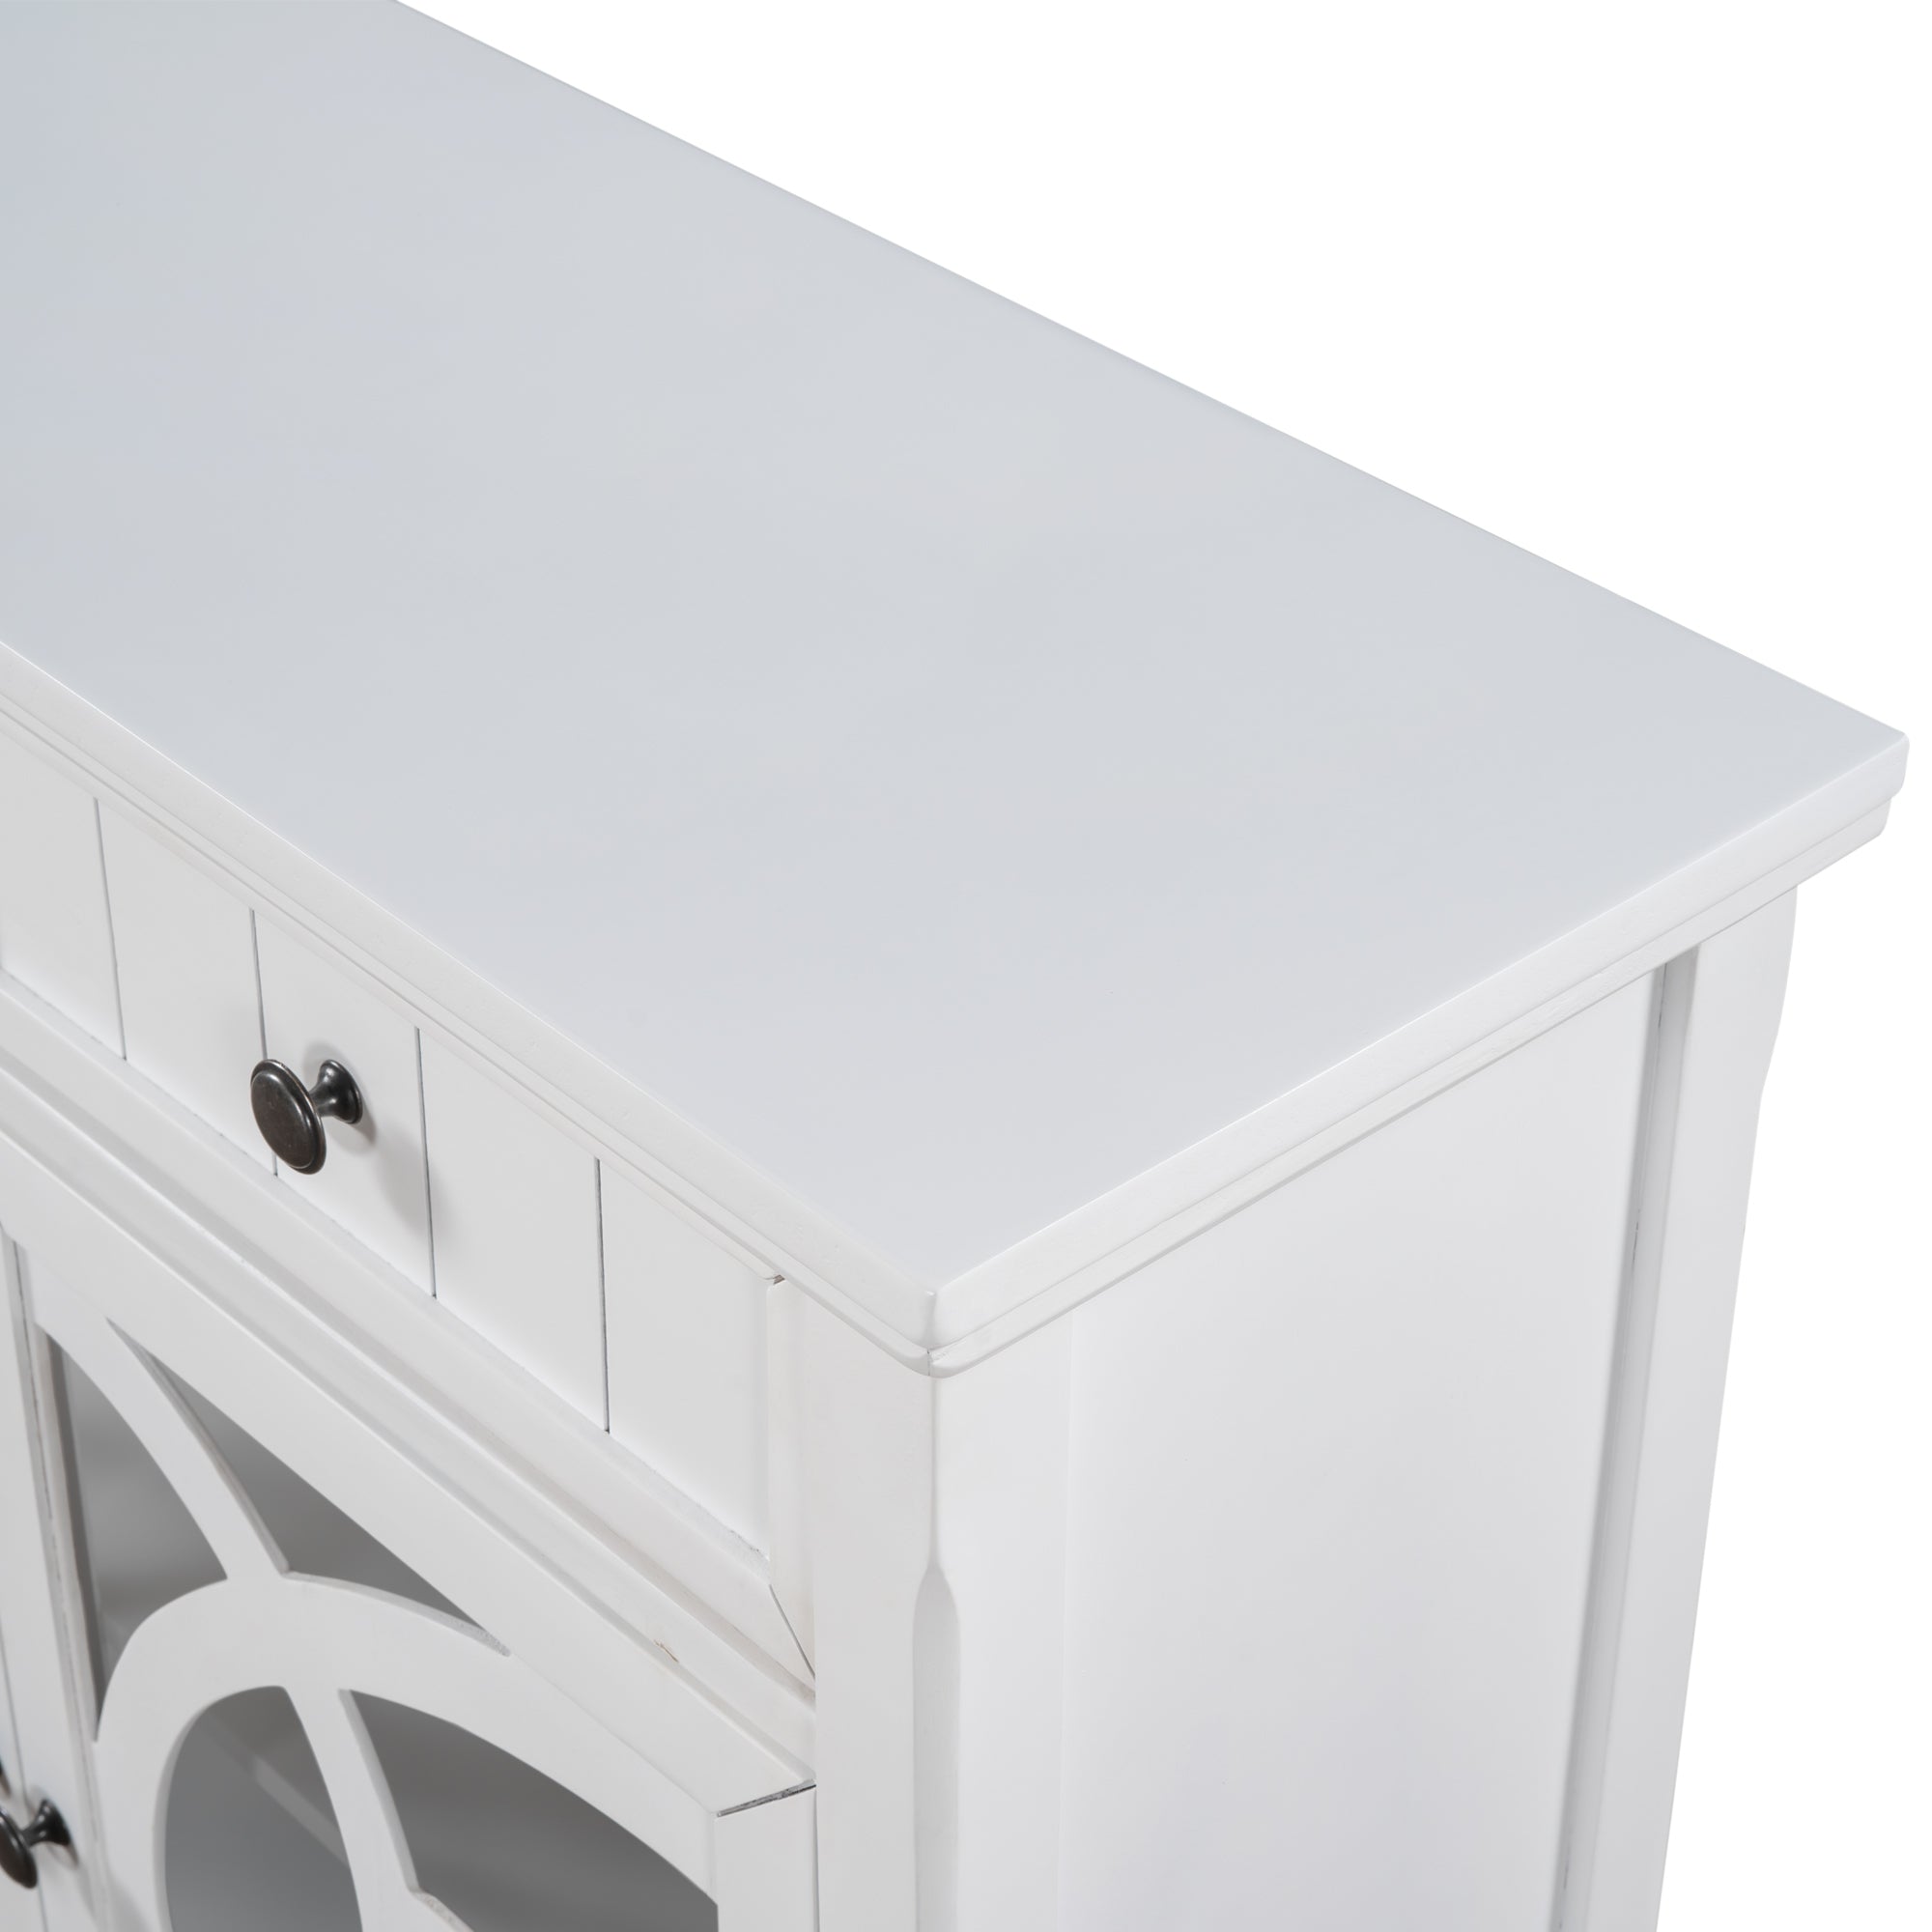 Accent Storage Cabinet Wooden Cabinet with Adjustable Shelf (White)